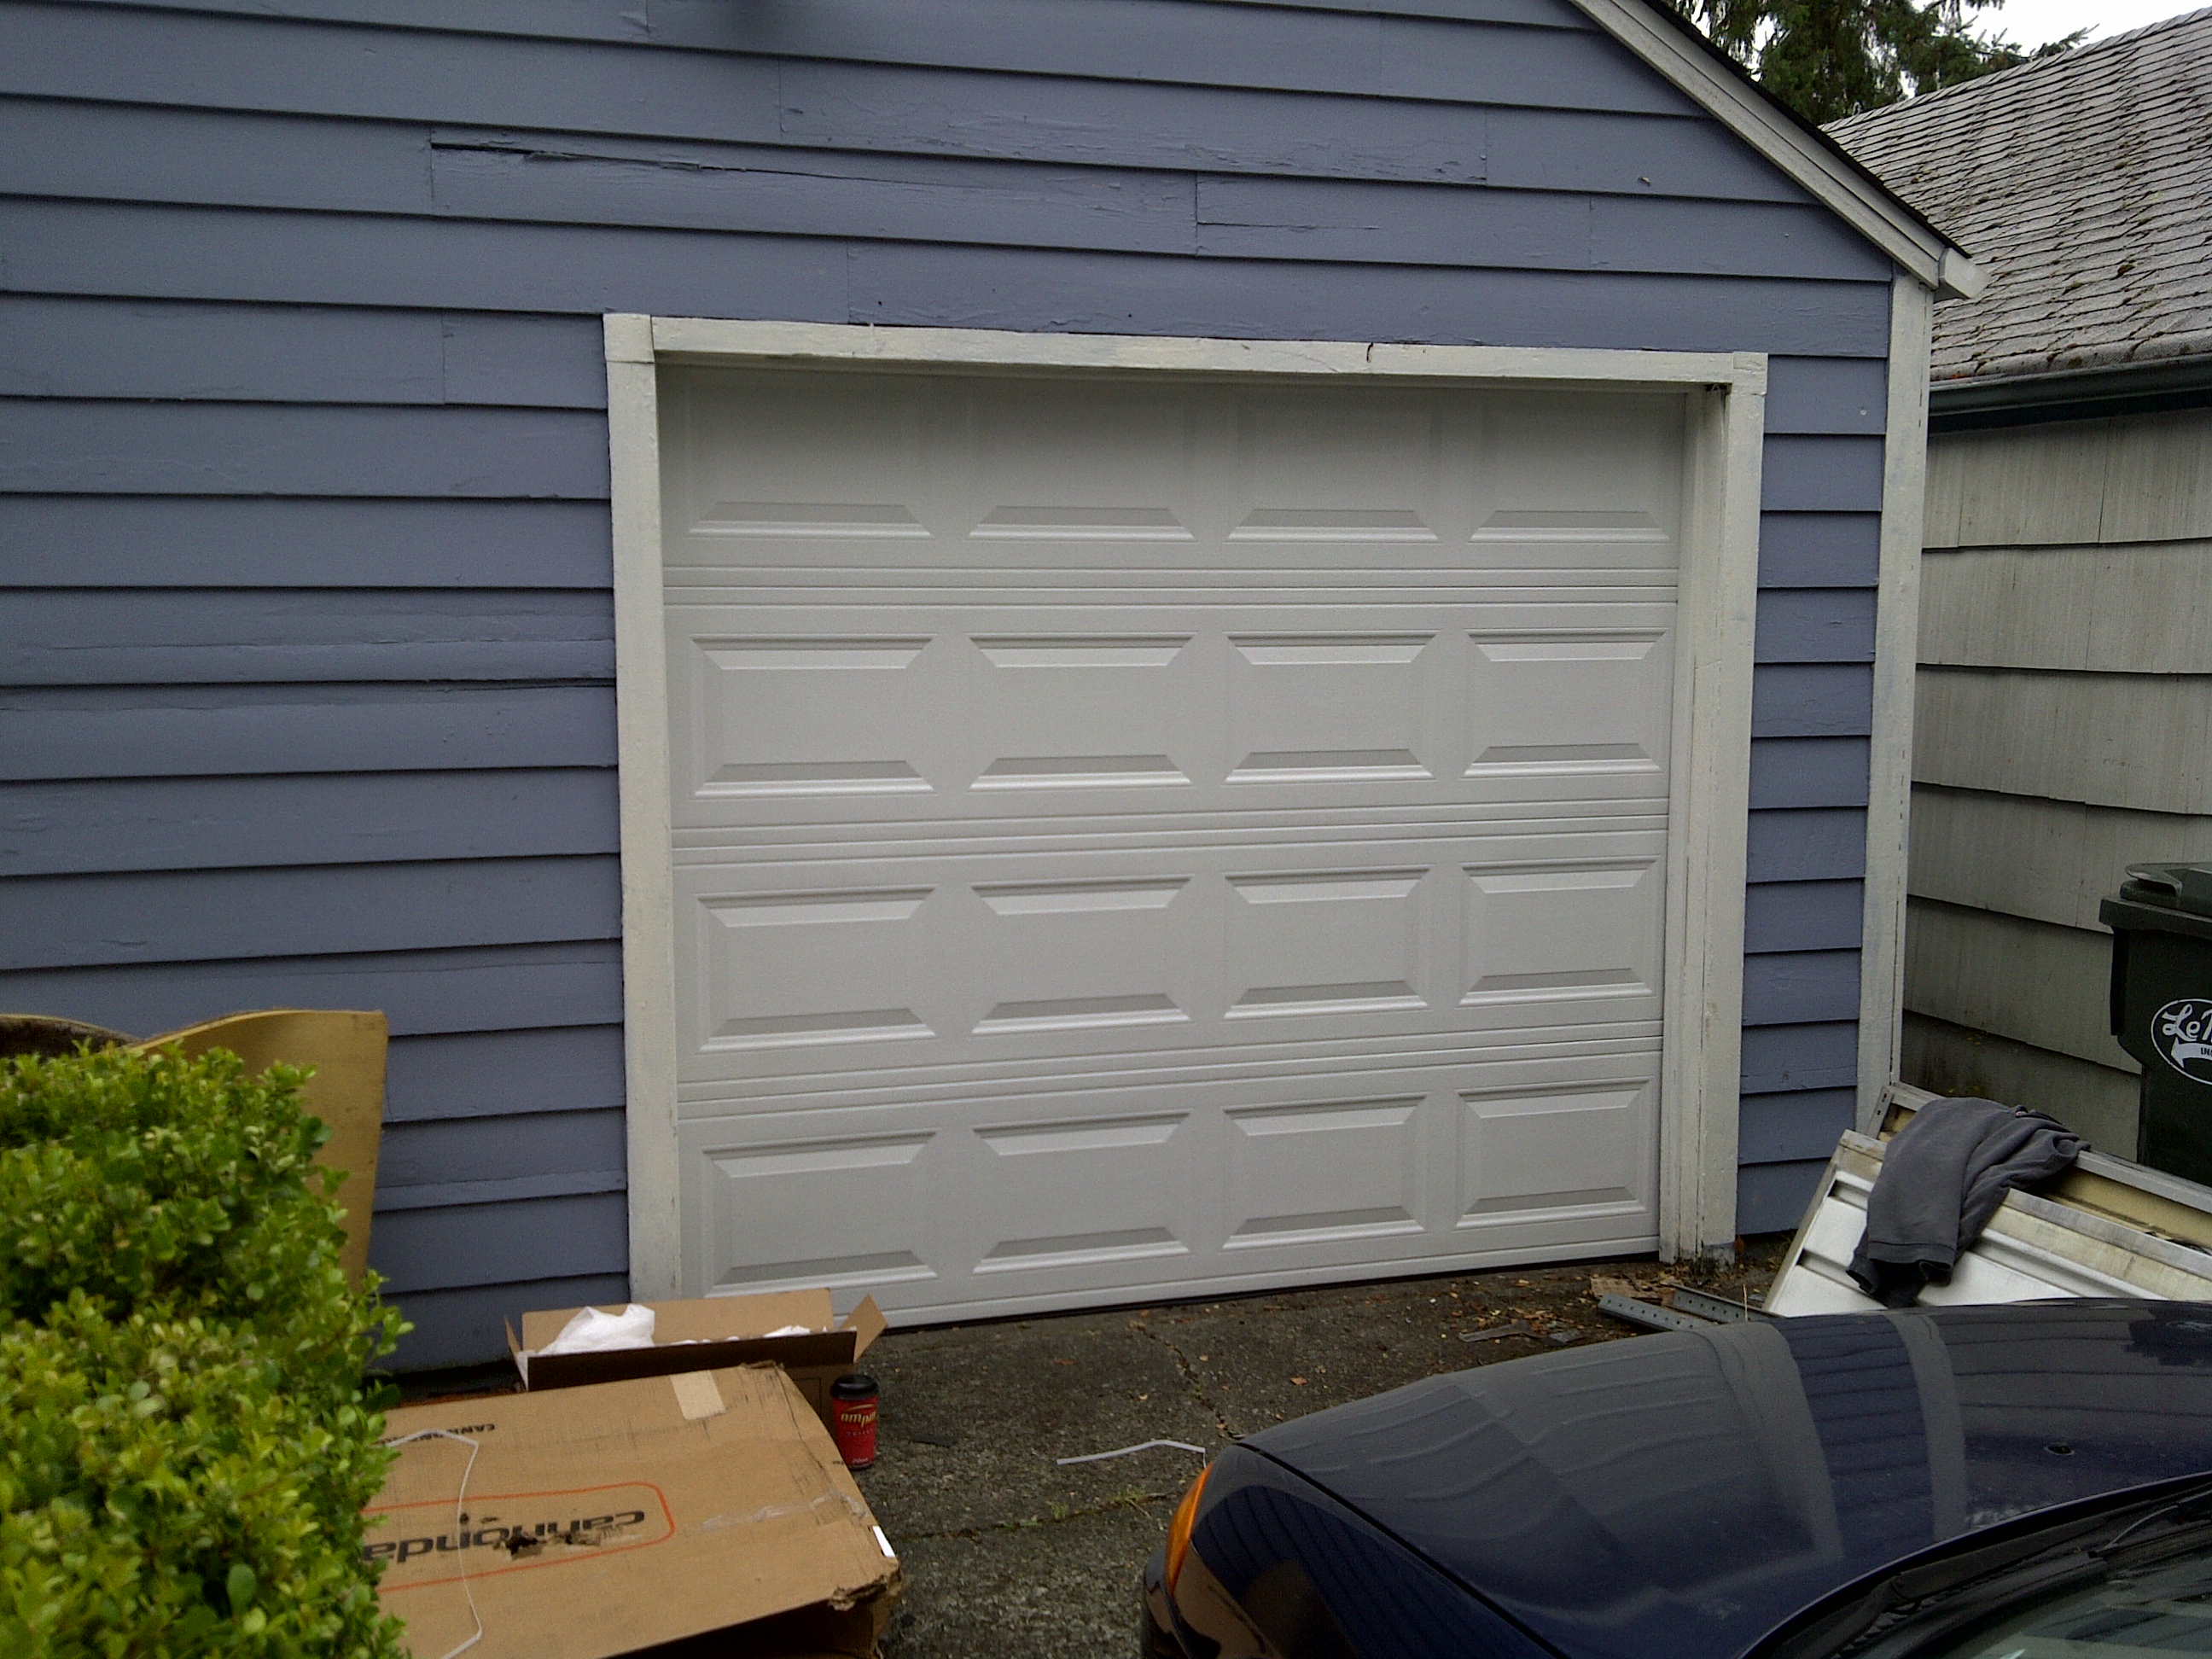 10 Crucial Things to Know When Looking For Roll Up Garage Doors | Home ...